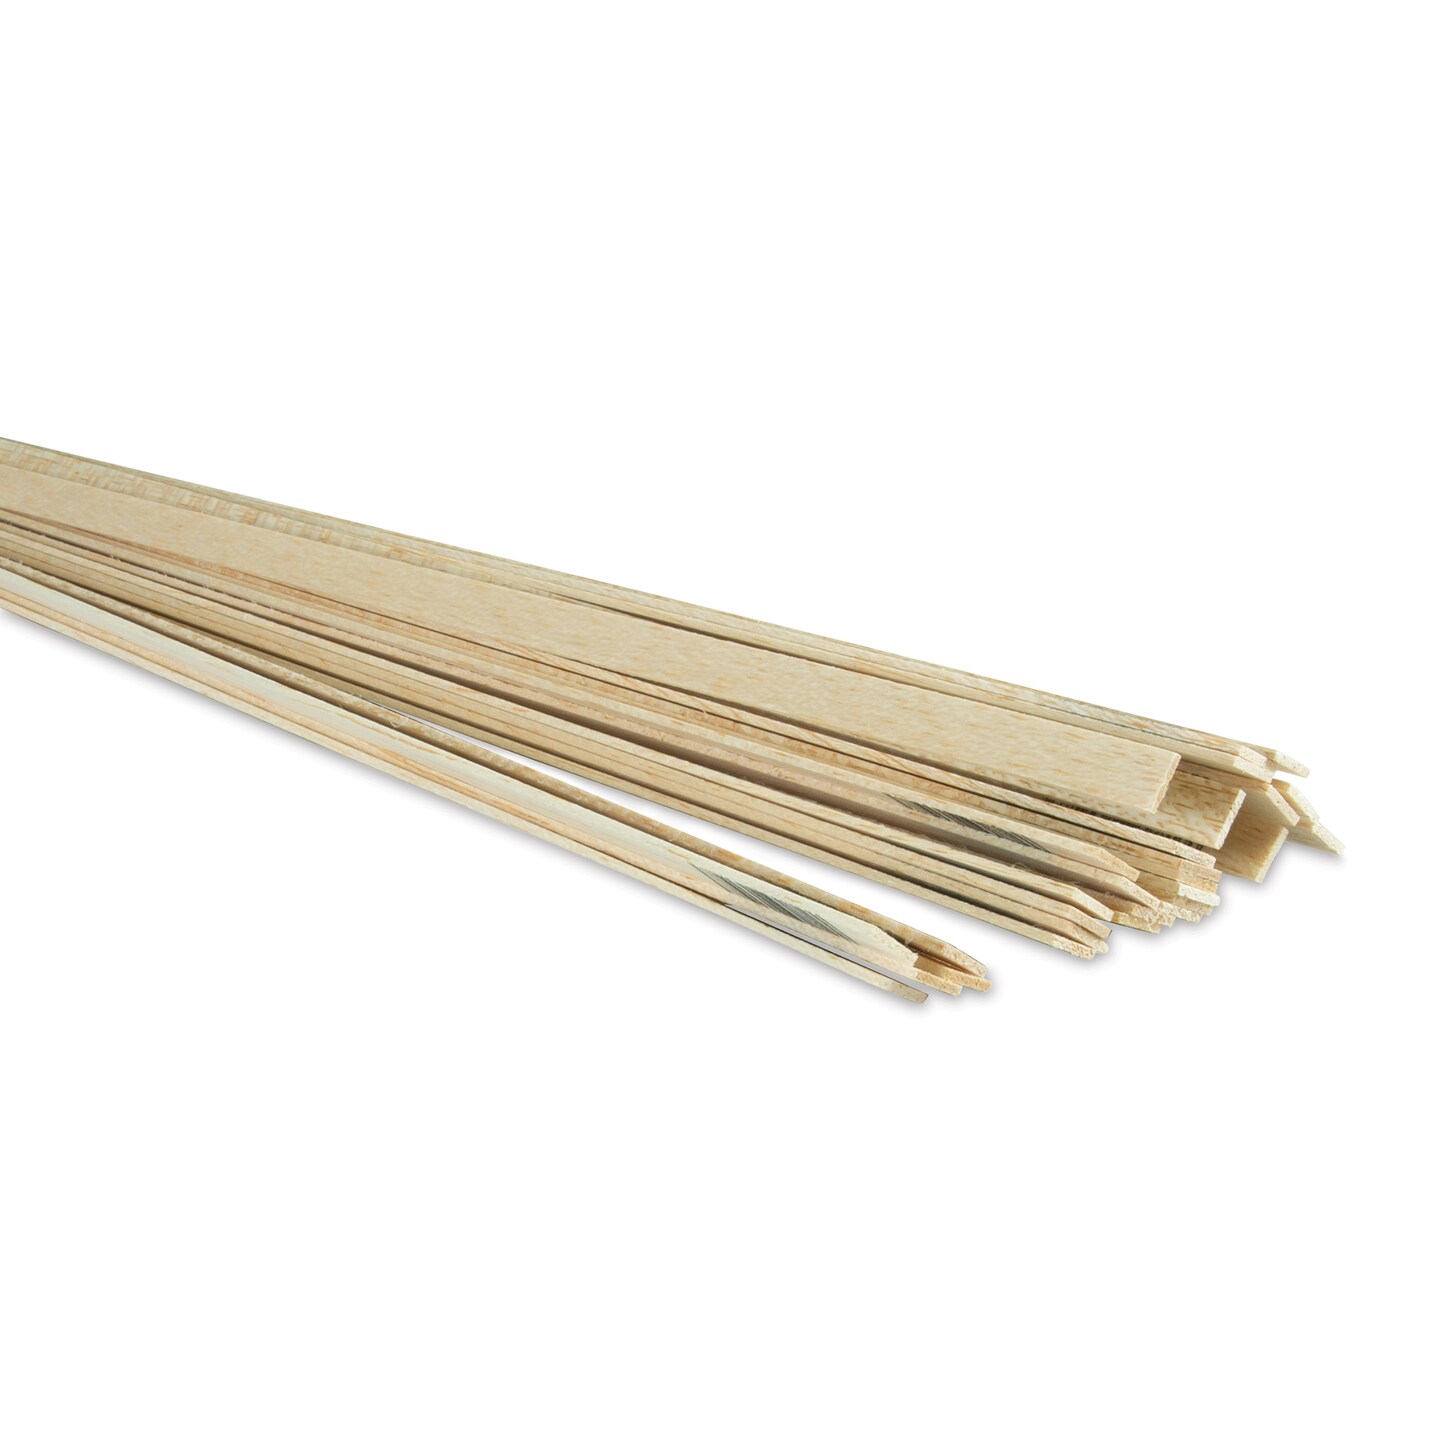 Midwest Products Balsa Wood Strips - 30 Pieces, 1/16 x 1/4 x 36